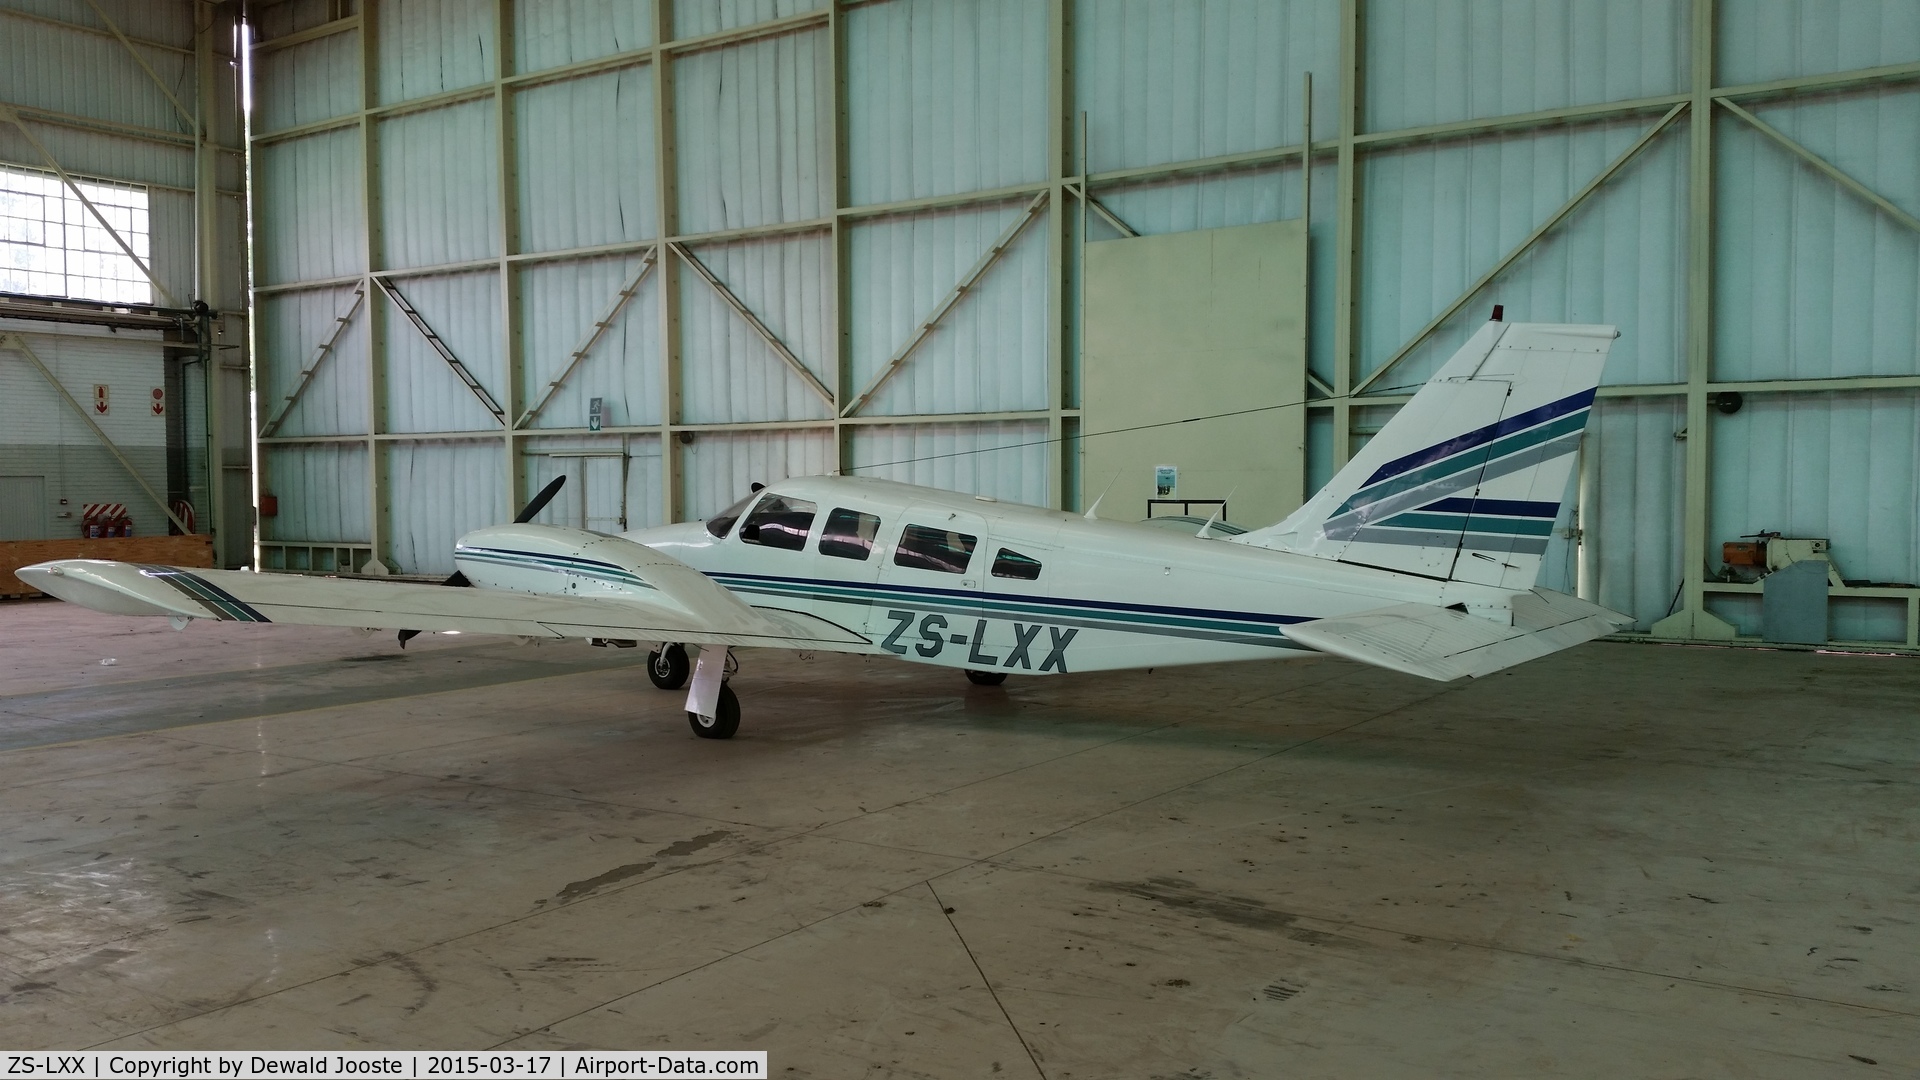 ZS-LXX, Piper PA-34-200T C/N 347870303, Aircraft found in a hangar at Denel Aerostructures.